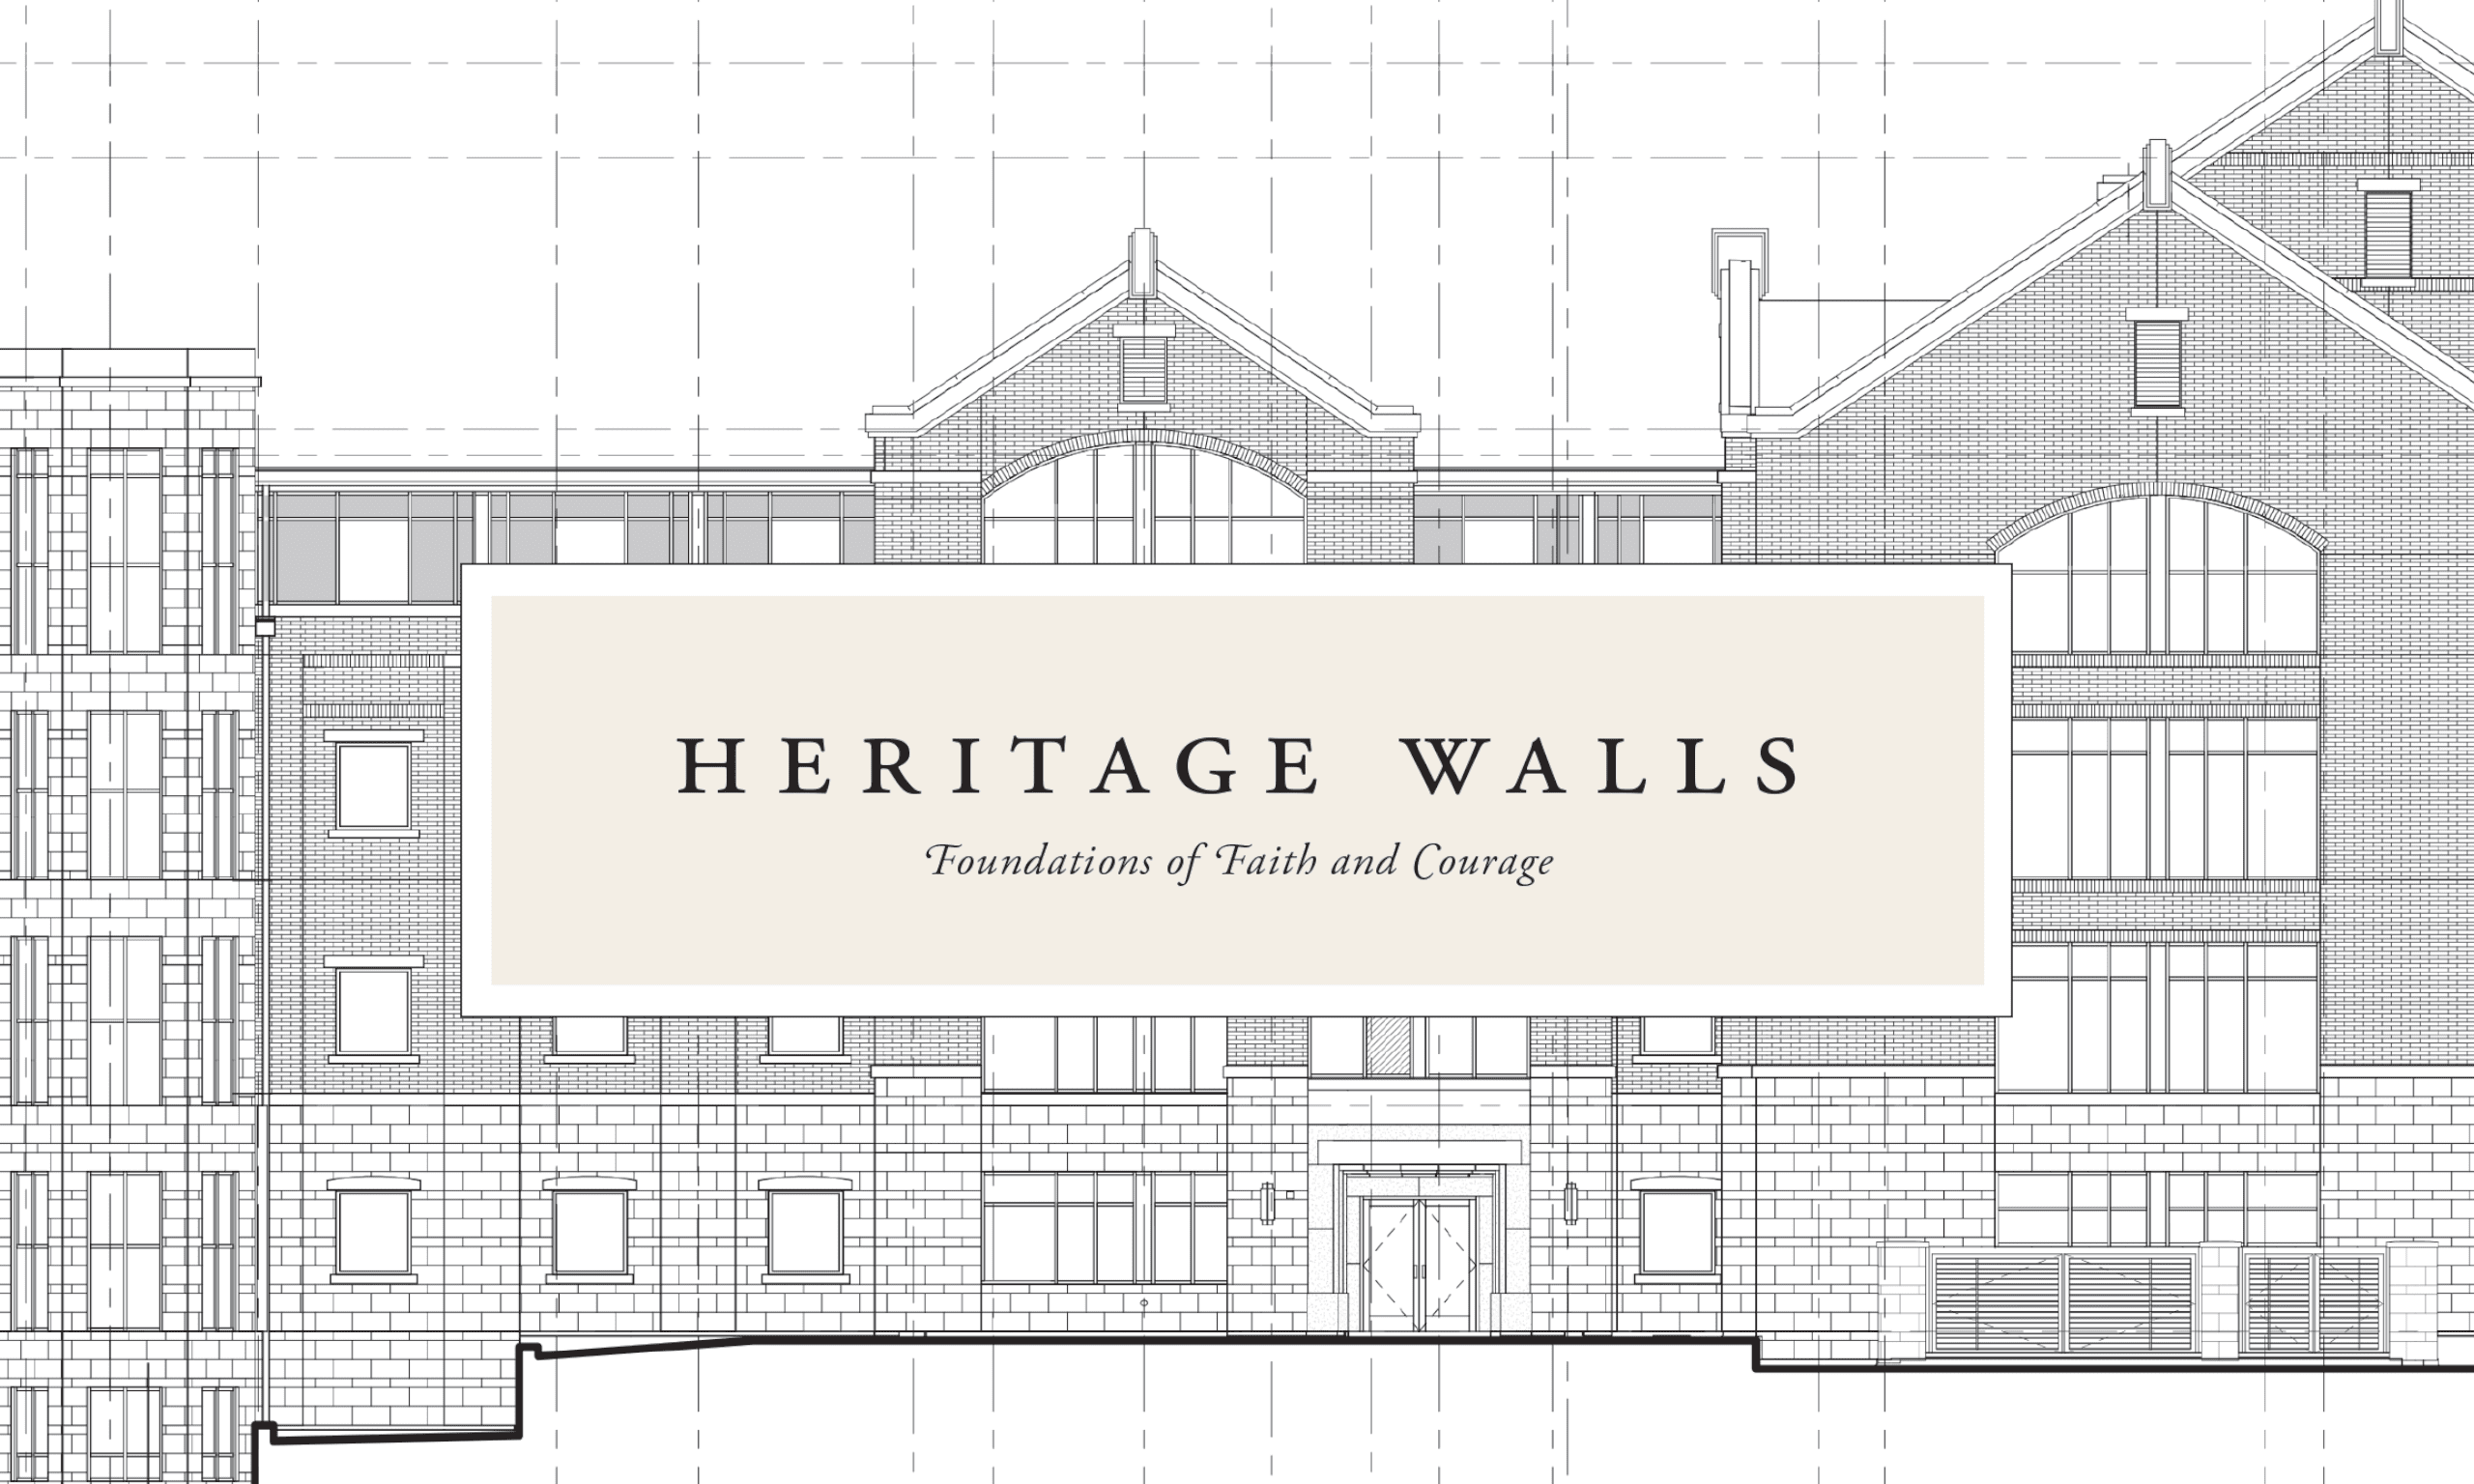 Architectural Drawing of a BYU Heritage Hall with the text "Heritage Walls: Foundations of Faith and Courage"